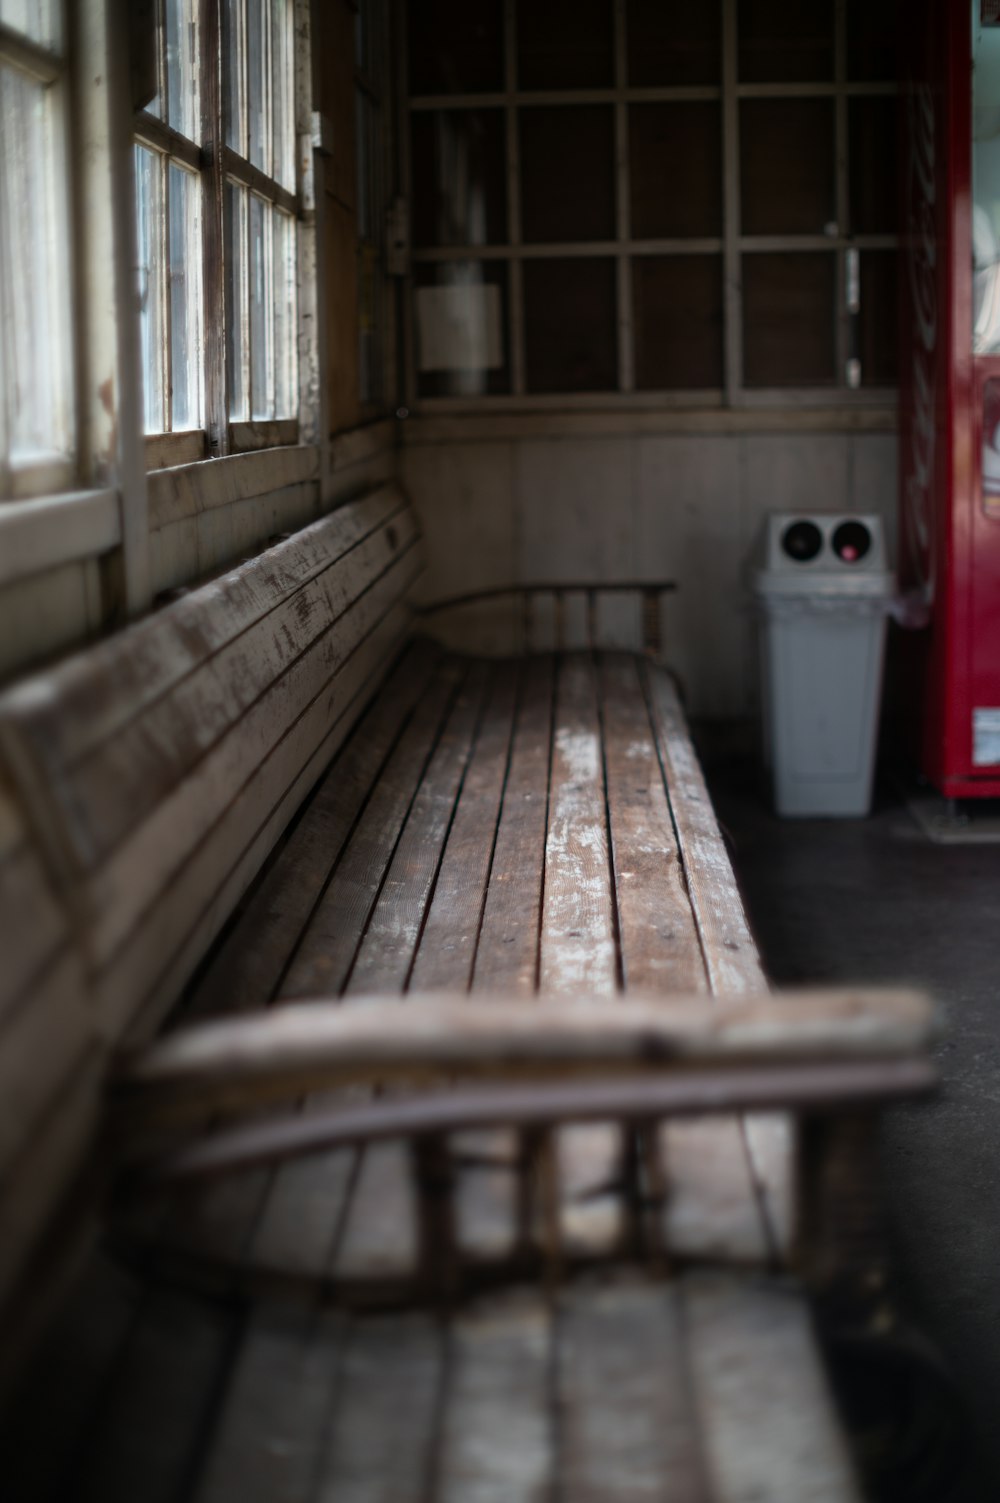 a wooden bench sitting next to a red door